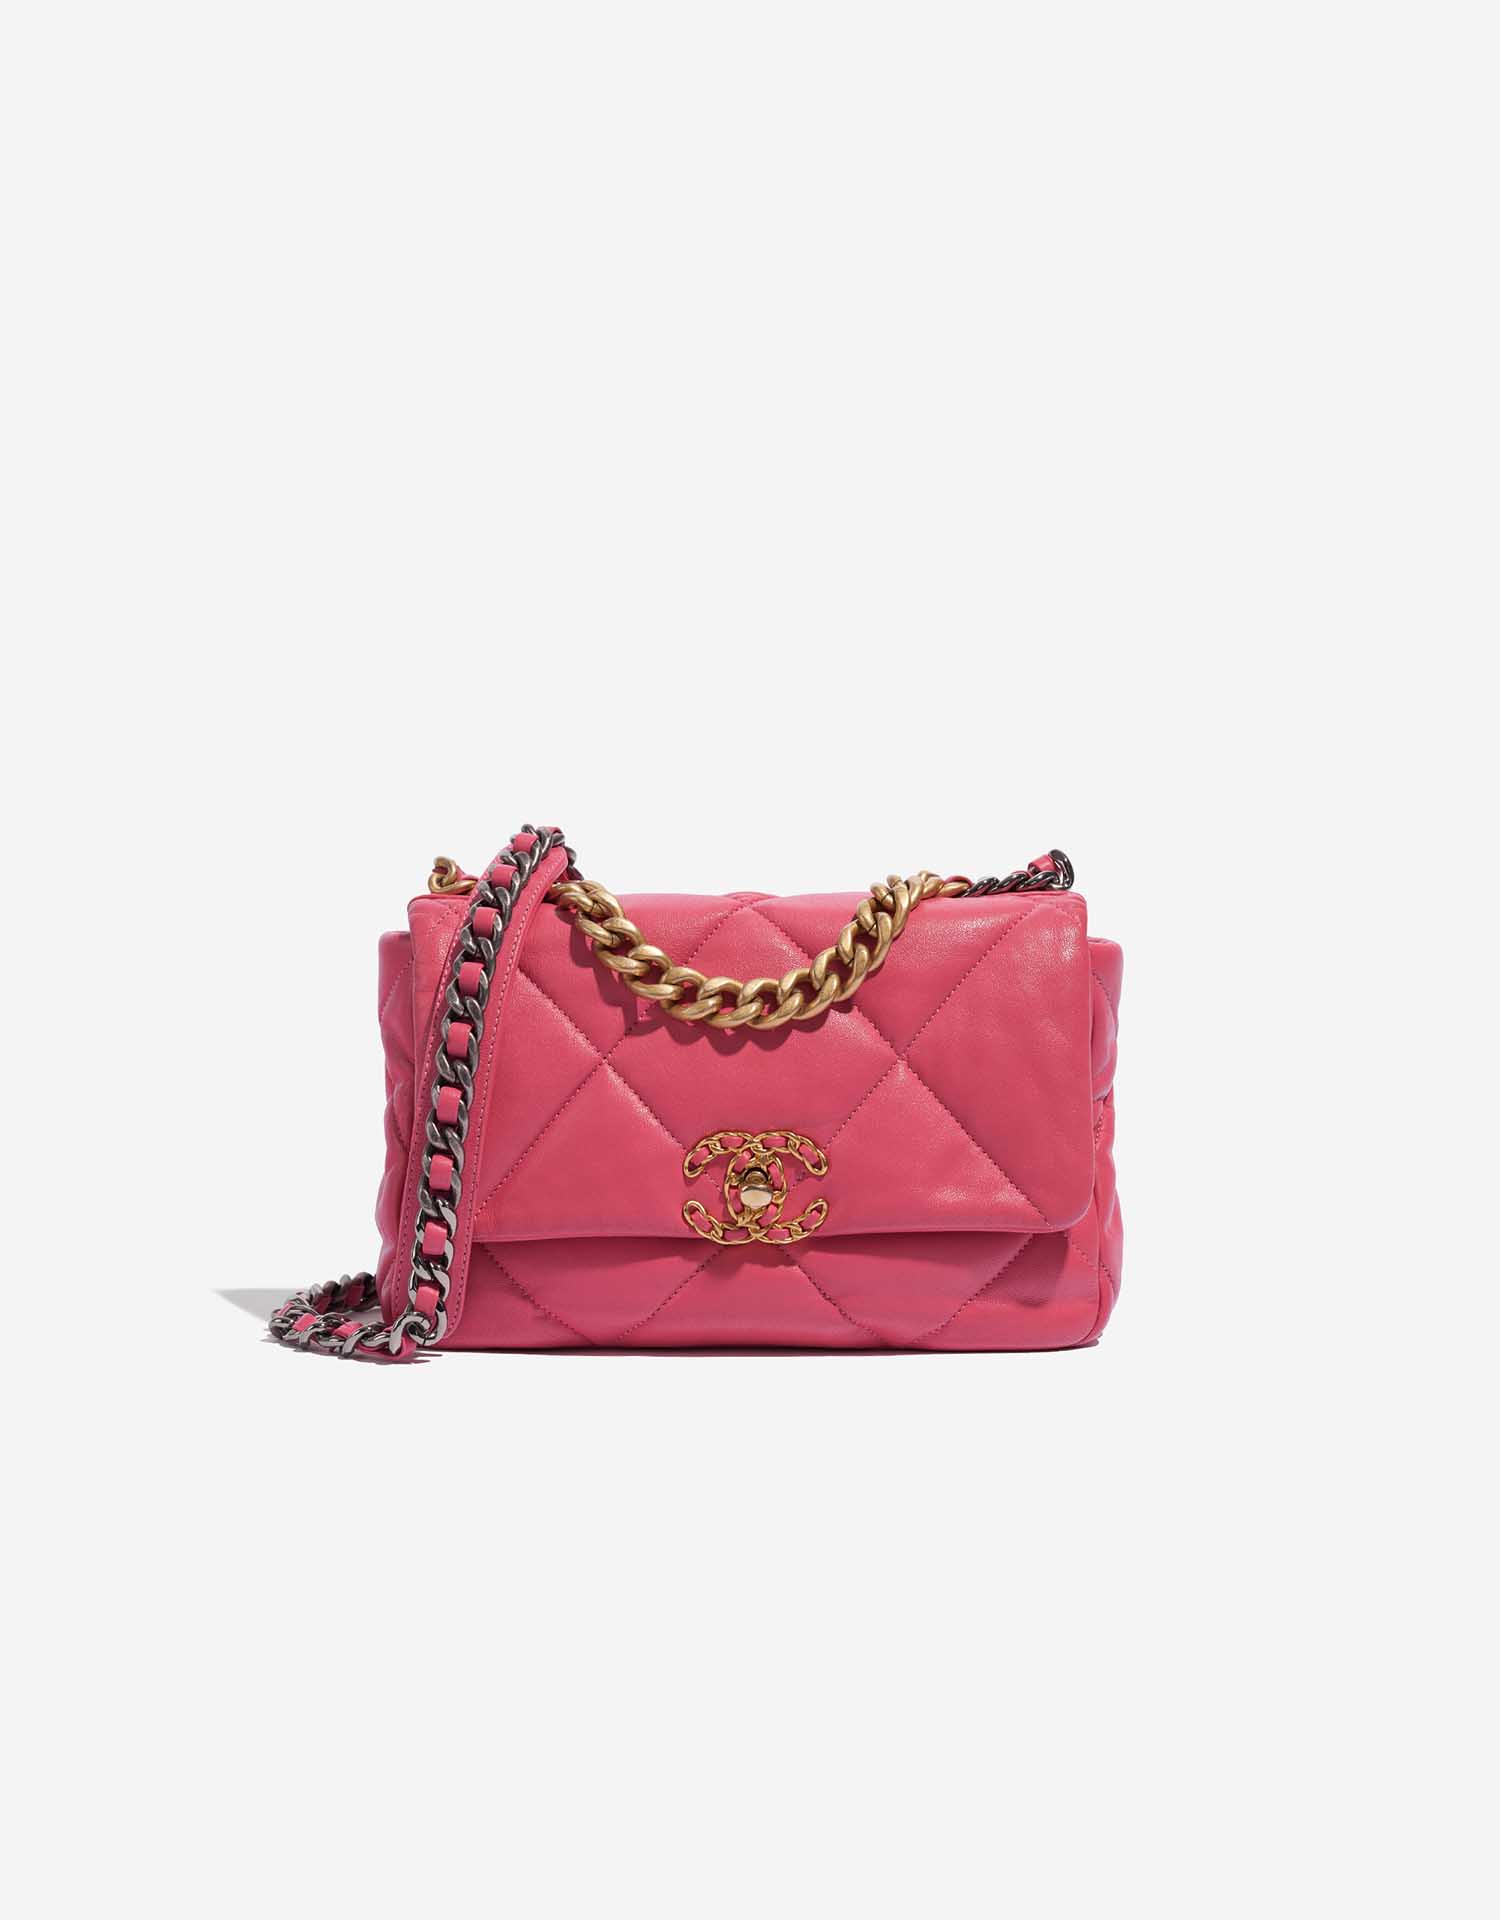 red chanel 19 bag